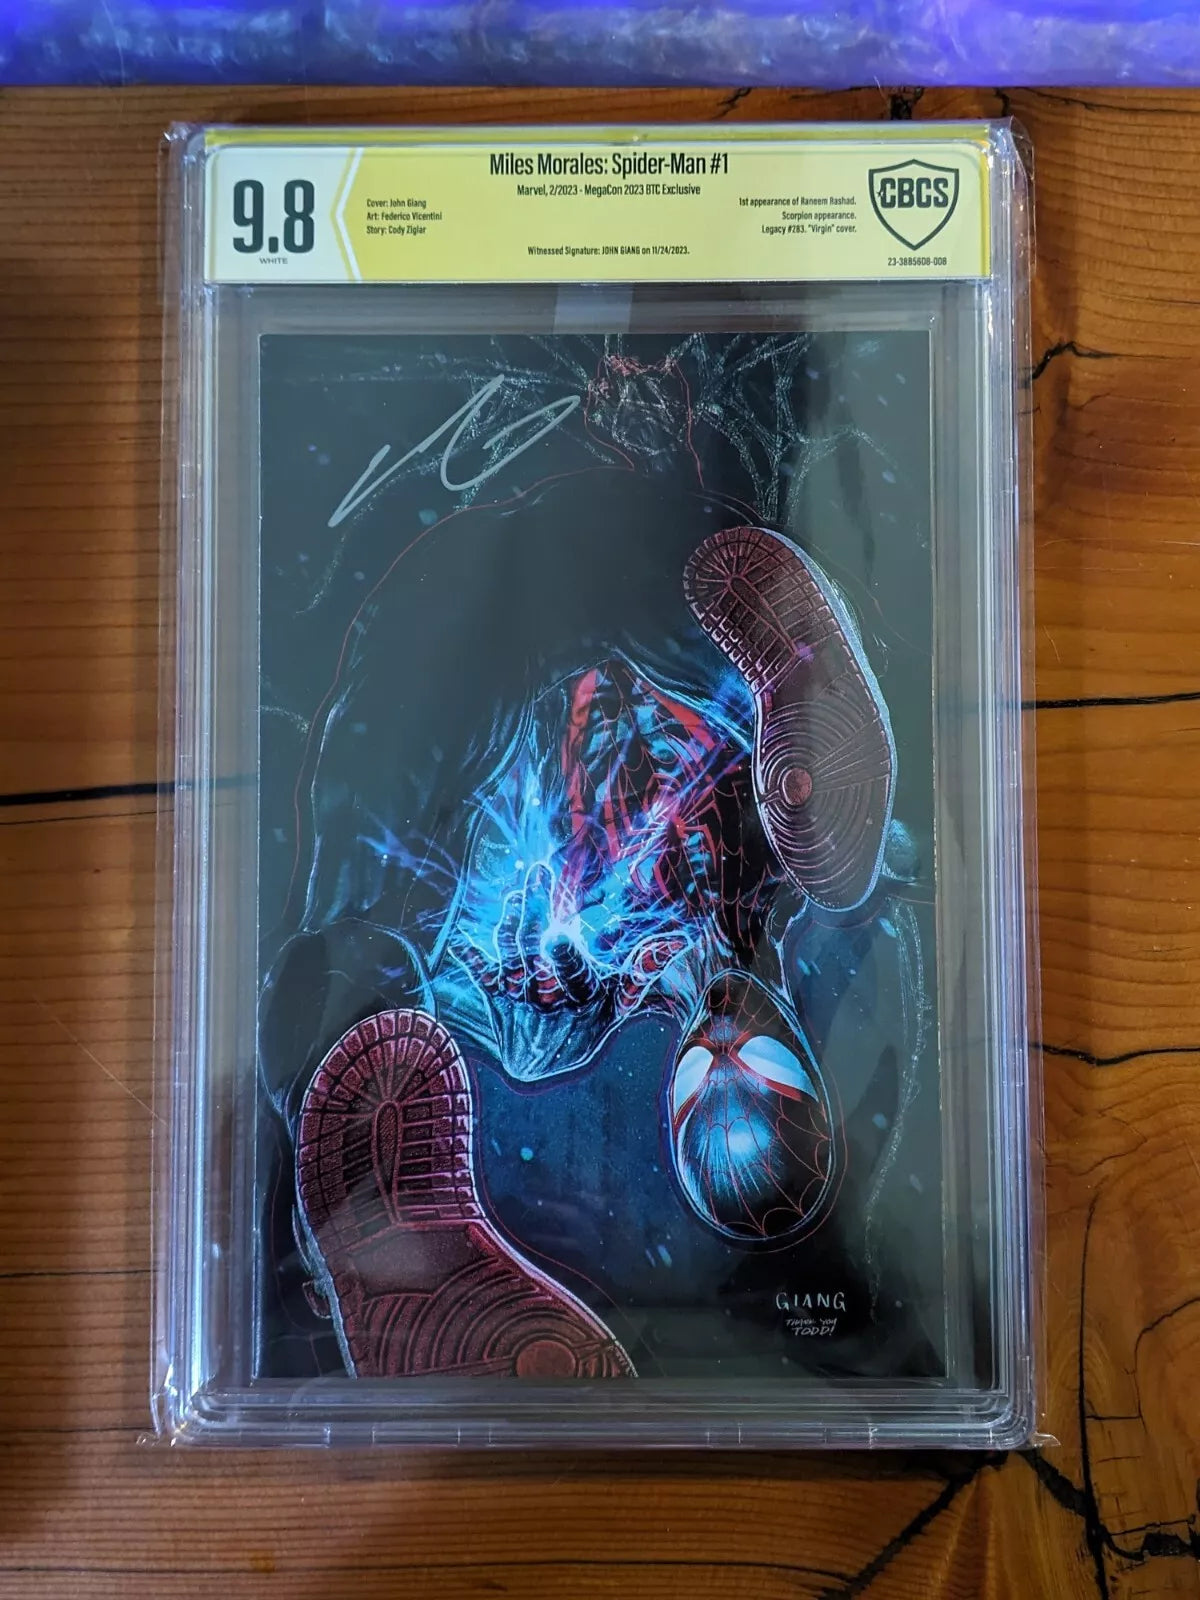 CBCS 9.8 Megacon 2023 Exclusive Miles Morales: Spiderman Signed by John Giang